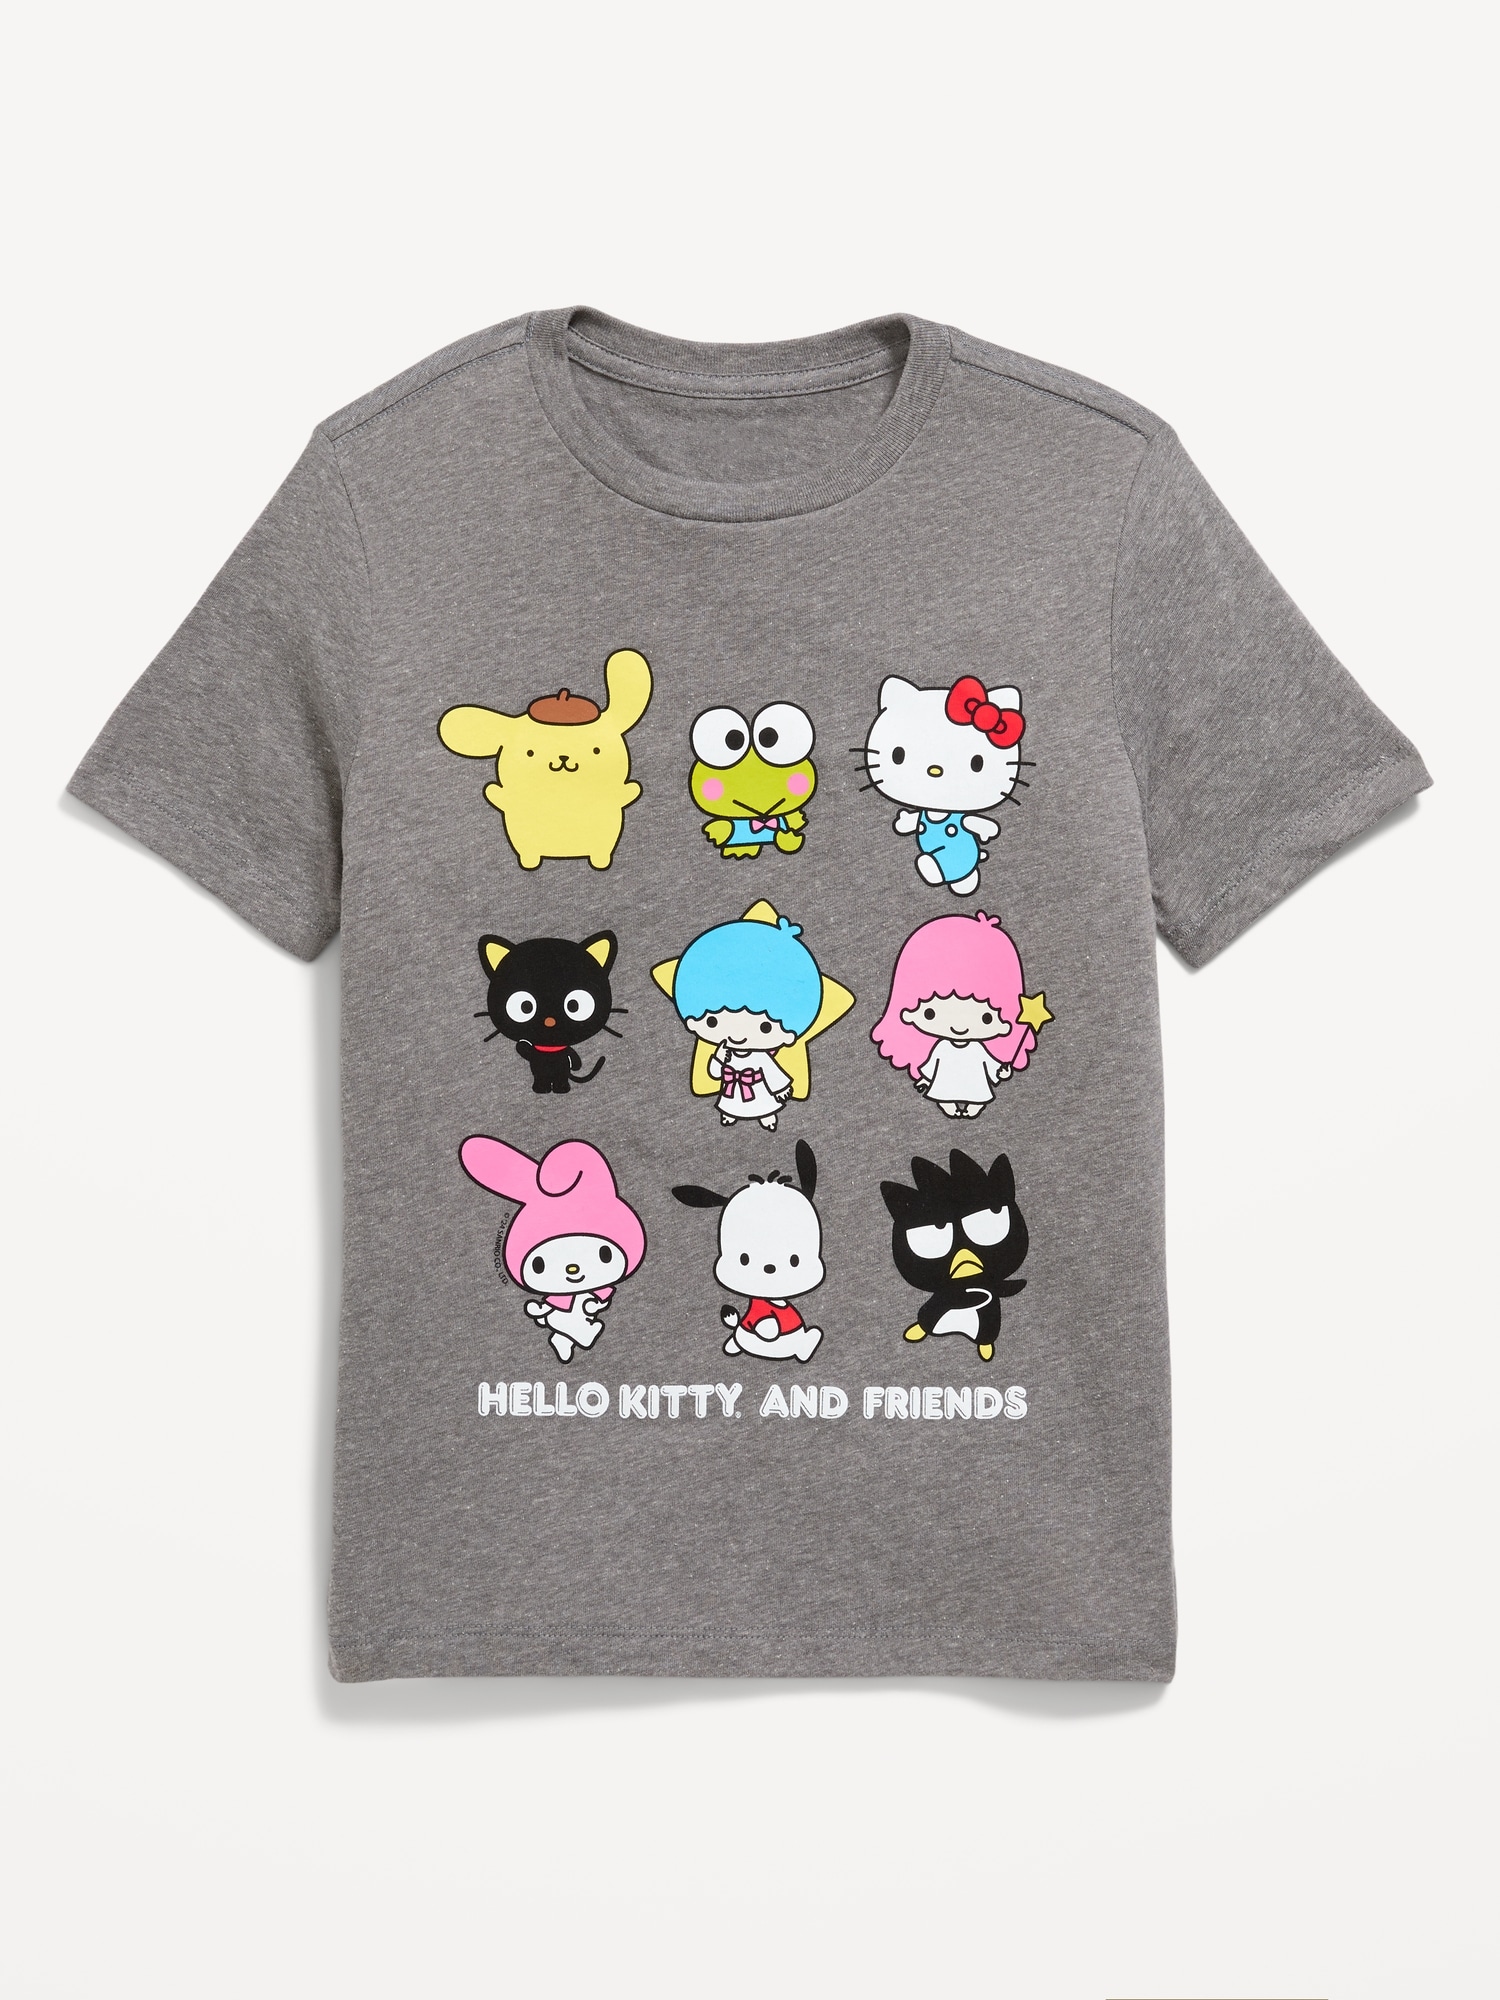 Hello Kitty Gender-Neutral Graphic T-Shirt for Kids Hot Deal